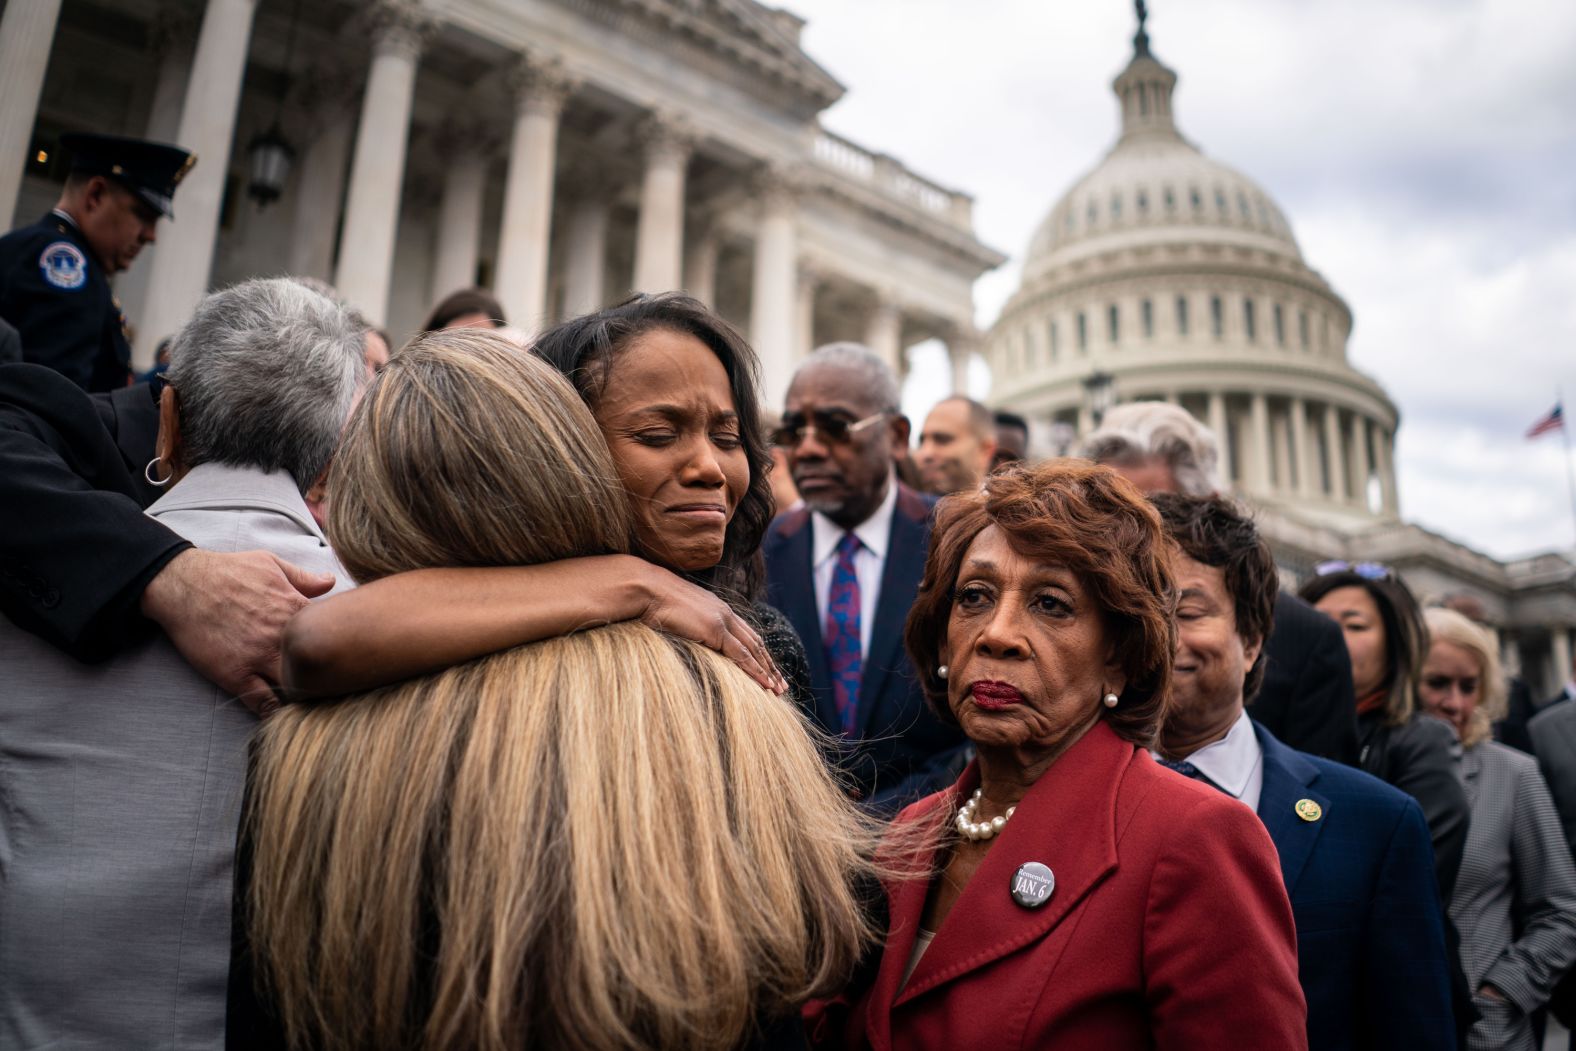 Serena Liebengood, widow of Capitol Police officer Howie Liebengood, is comforted by members of Congress on Friday, January 6, after a ceremony marking the second anniversary of the <a href="index.php?page=&url=http%3A%2F%2Fwww.cnn.com%2F2022%2F01%2F03%2Fpolitics%2Fgallery%2Fjanuary-6-capitol-insurrection%2Findex.html" target="_blank">2021 Capitol attack</a>.